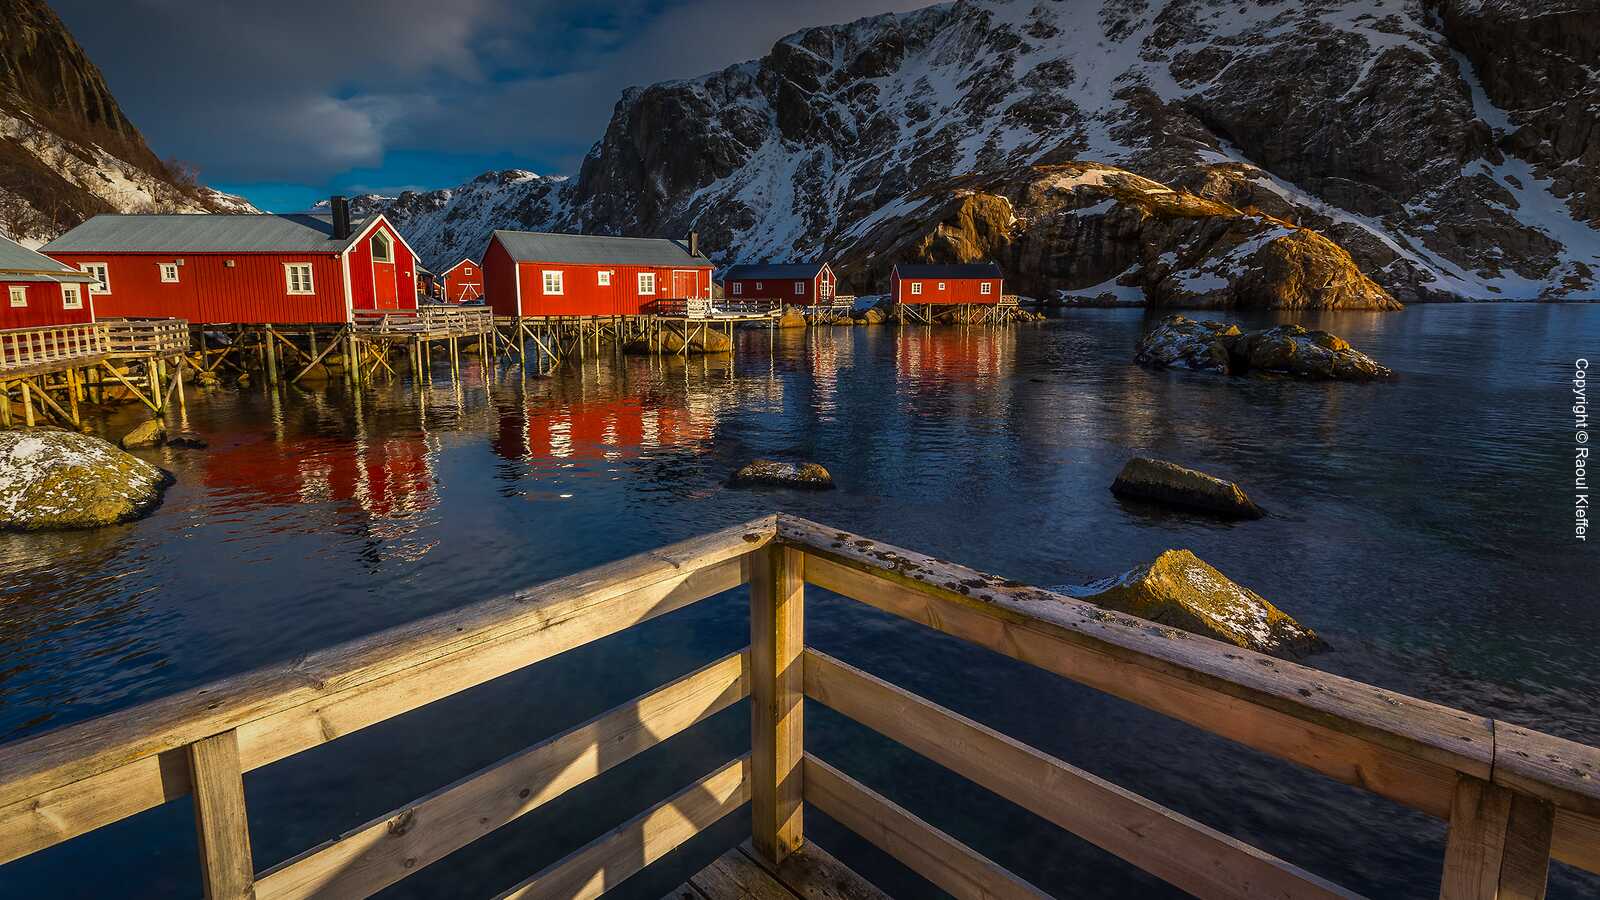 The most beautiful photos of Norway